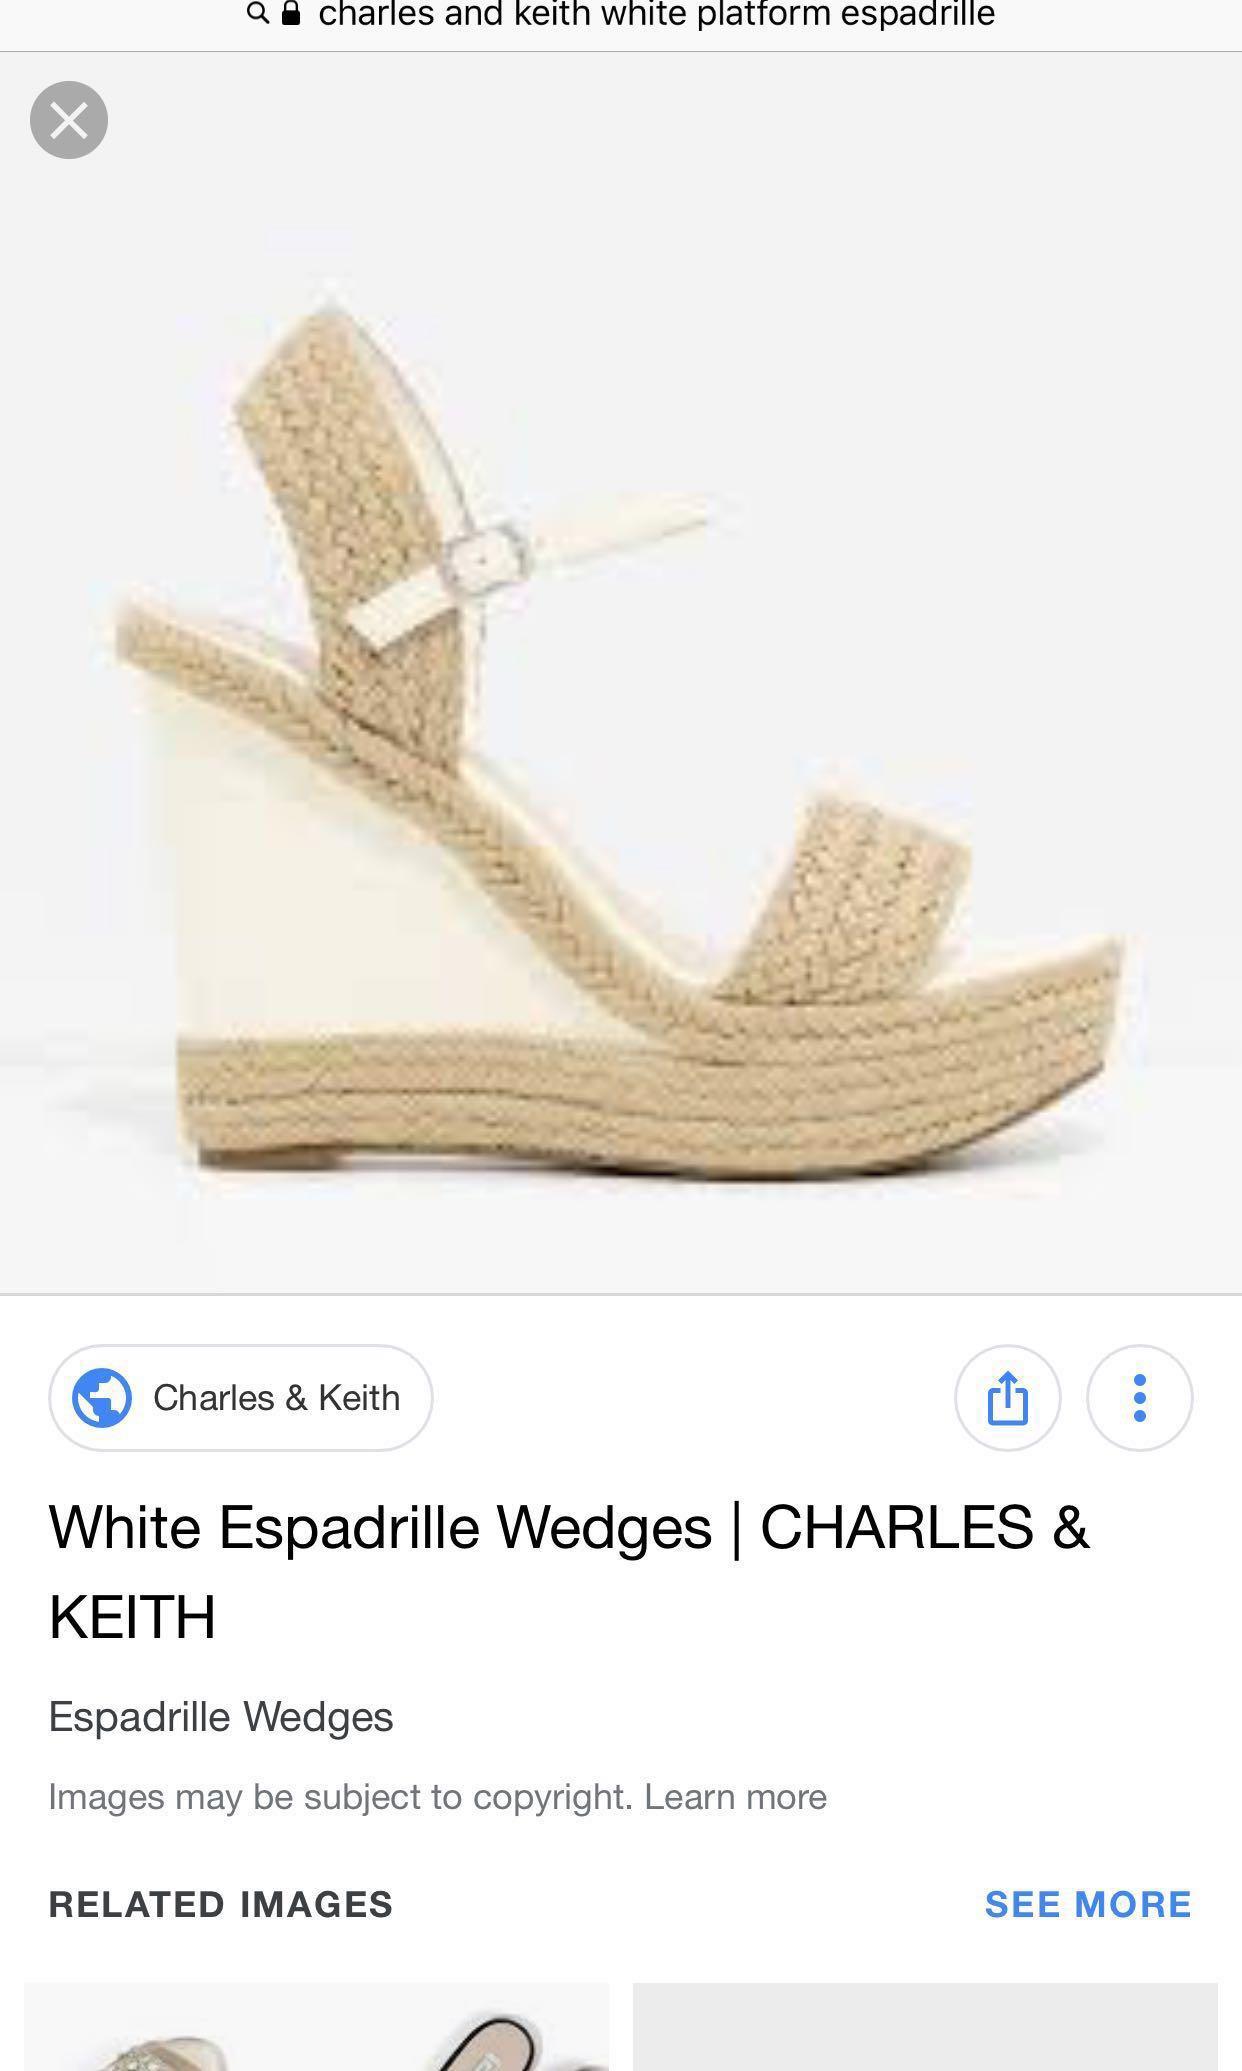 women's white espadrille wedge shoes